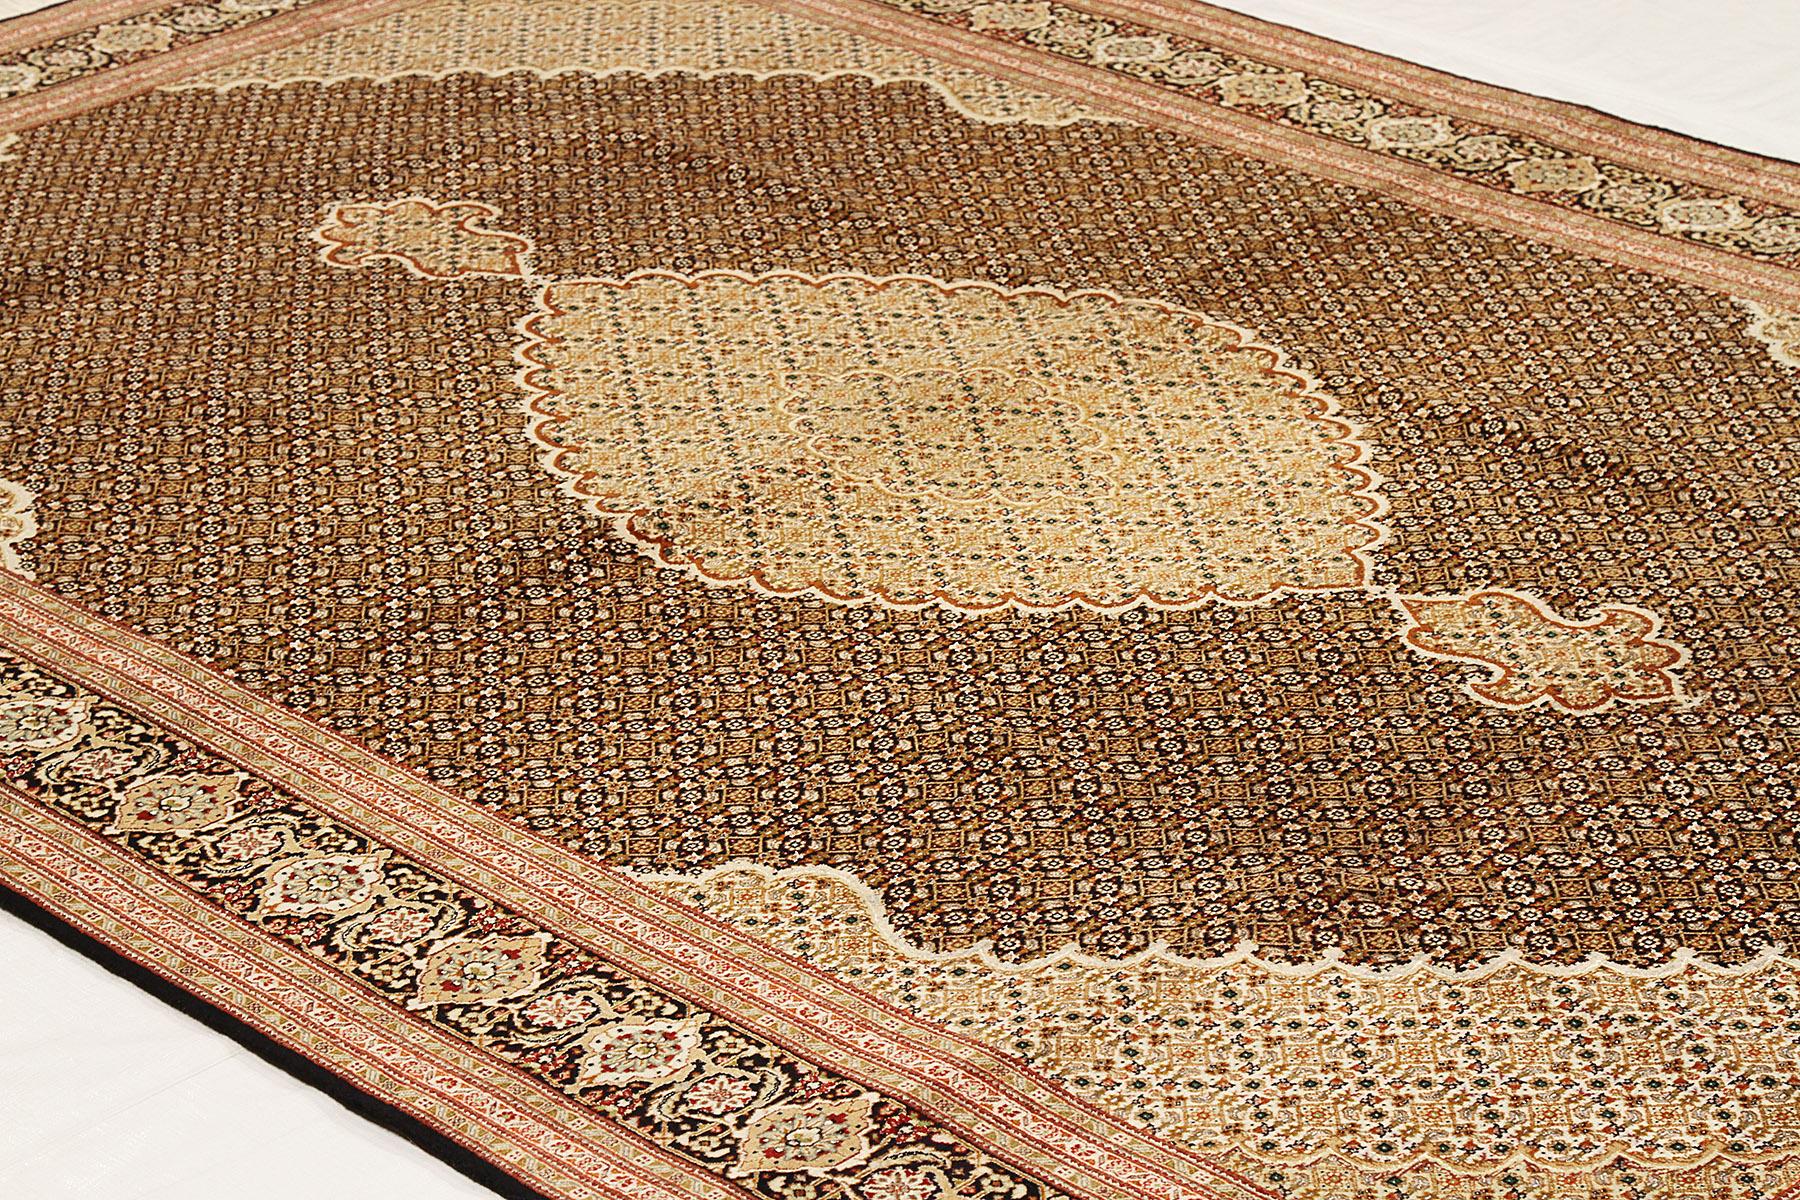 Hand-Woven Contemporary Persian Tabriz Rug with White & Brown Flower Motifs on Black Field For Sale